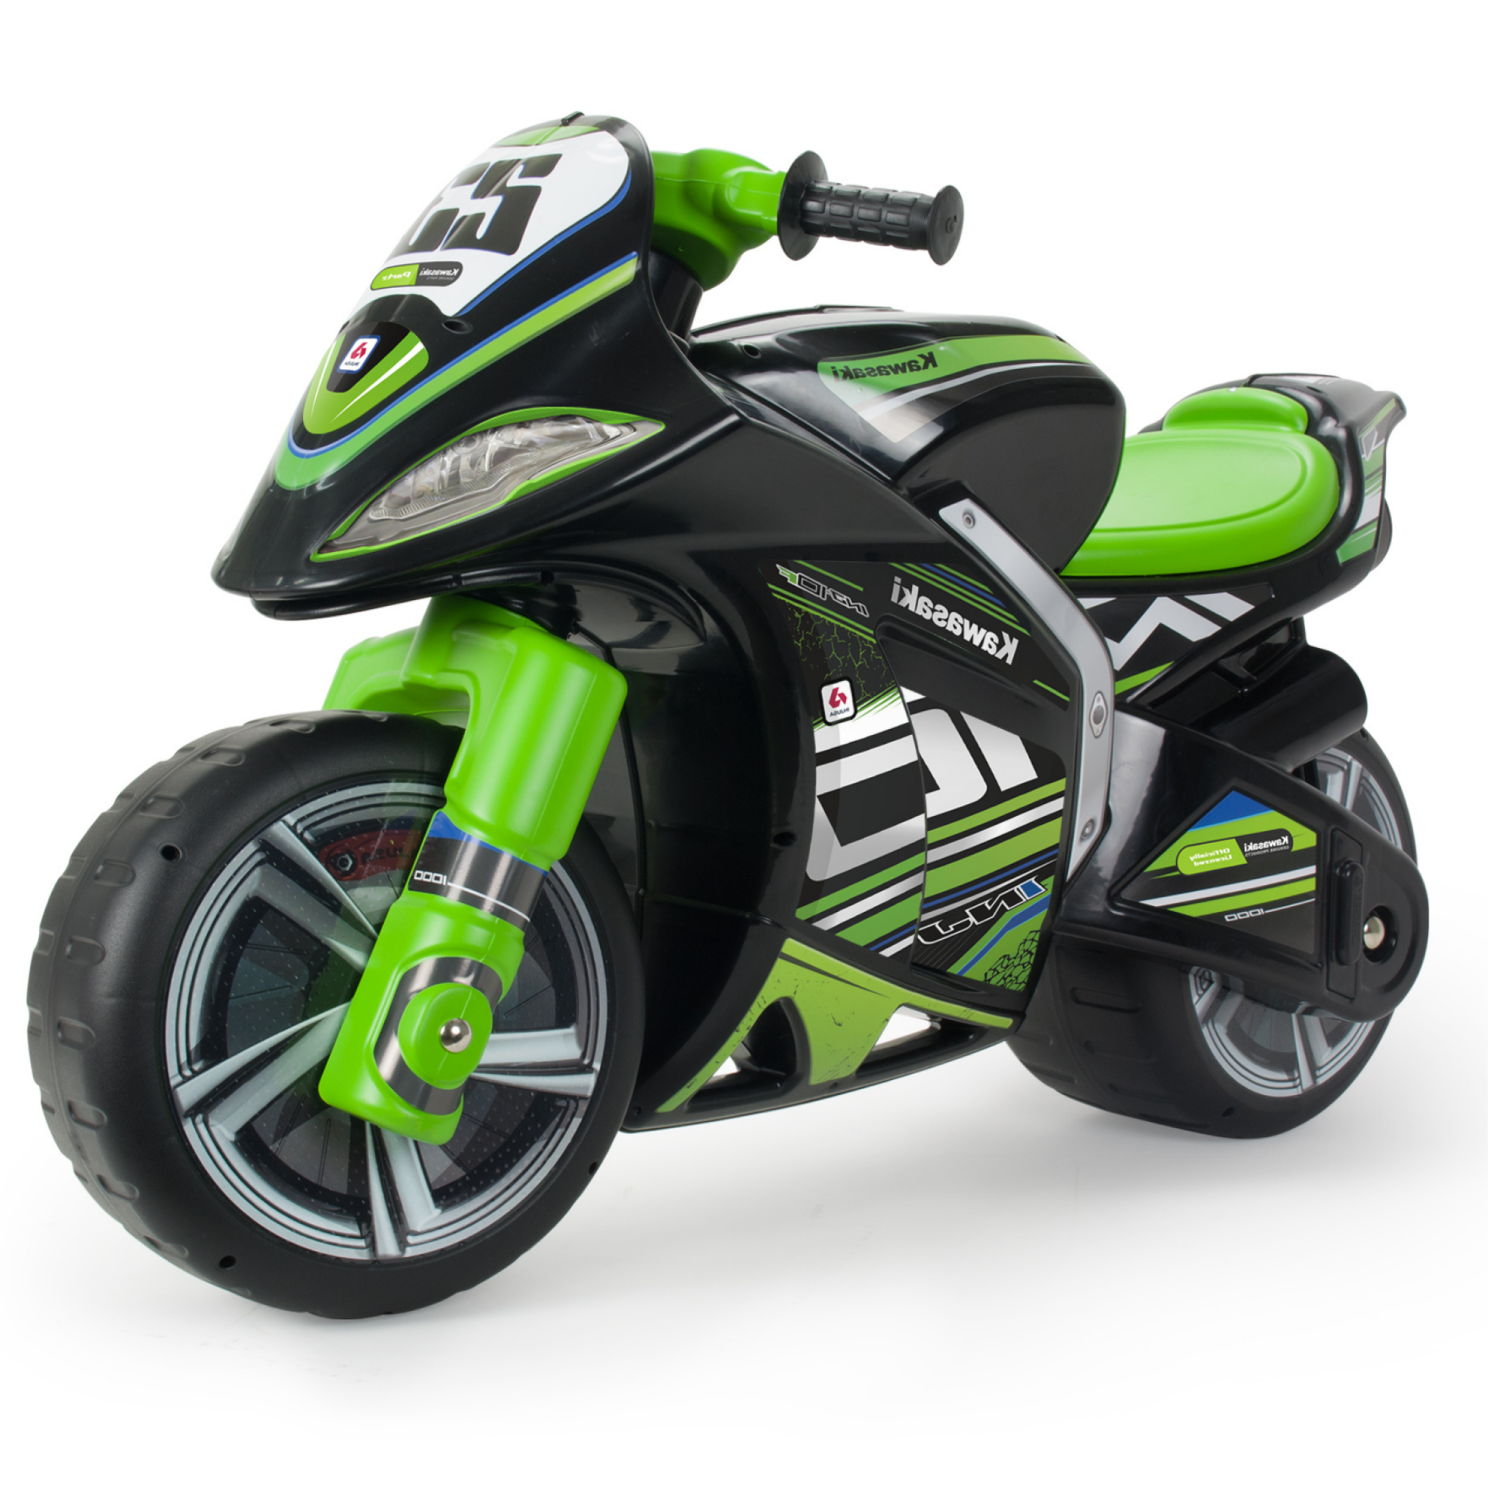 Officially Licensed & Certified INJUSA Kawasaki Balance Bike Winner Edition w/ Foot-to-Foot Acceleration - Improves Balance and Cognition - KIDS VIP